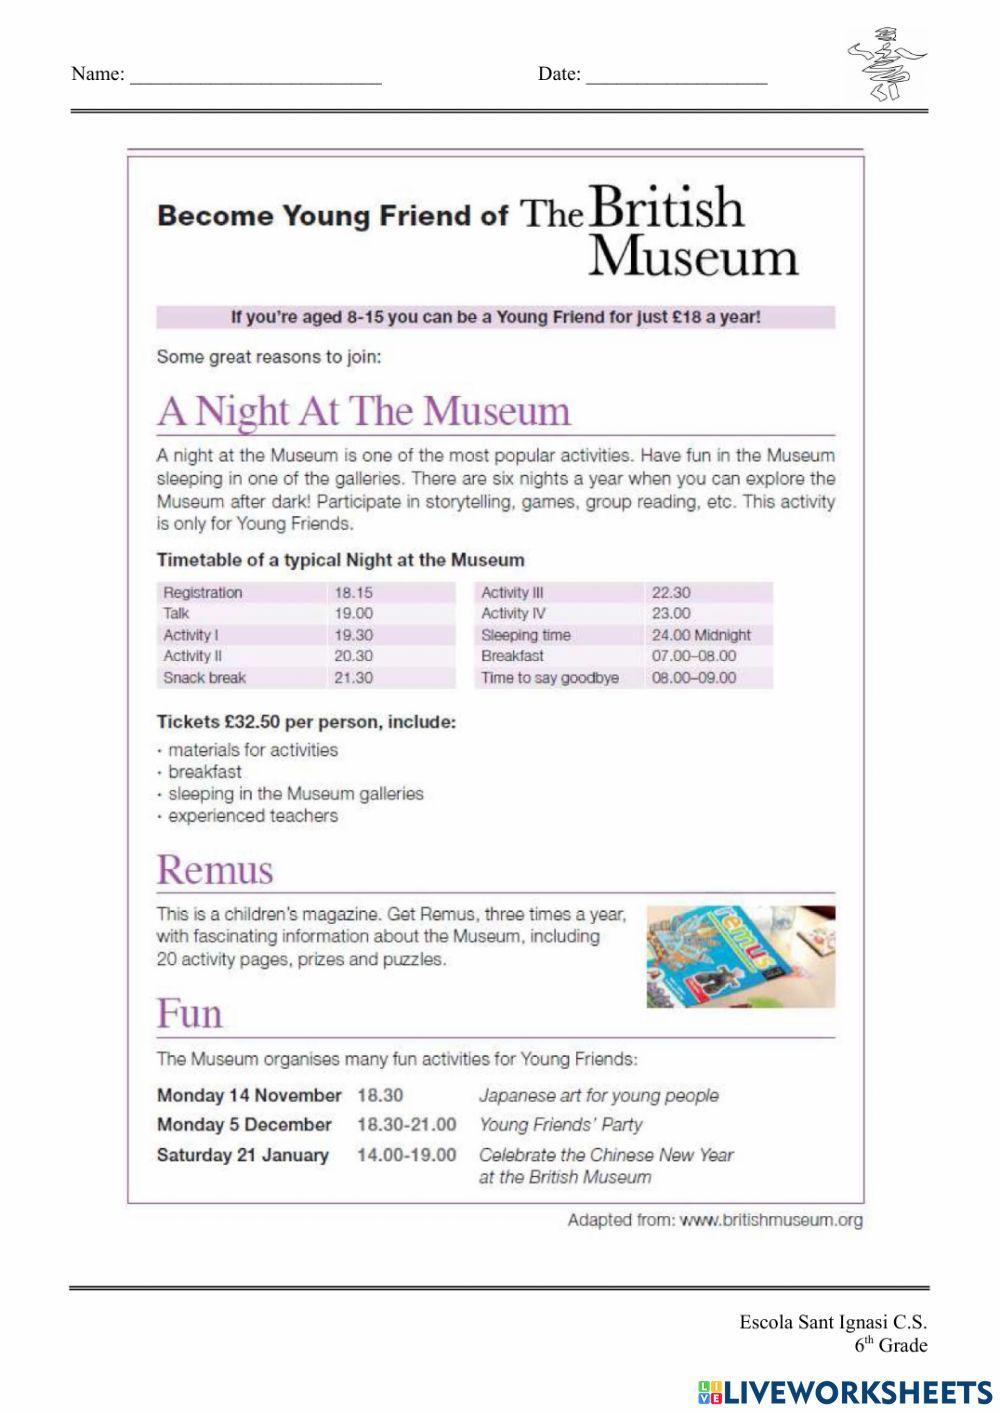 Reading comprehension. A night at the museum